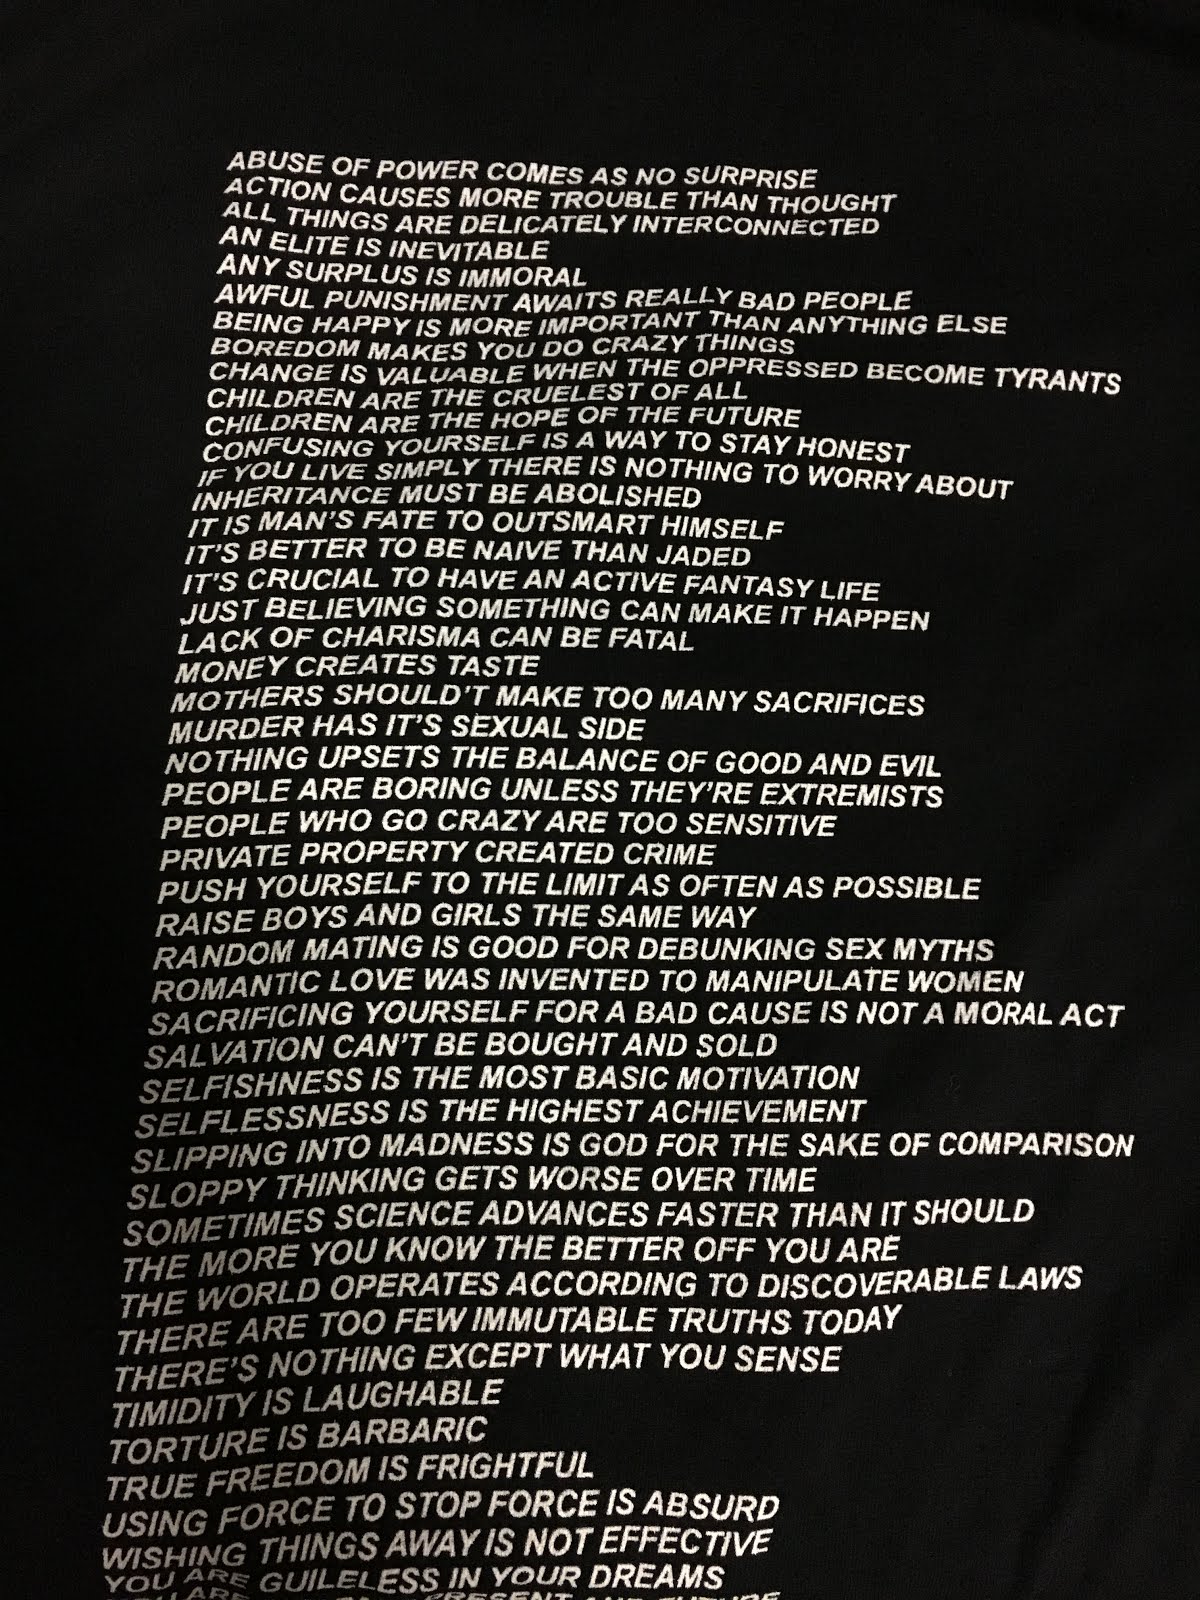 Some wisdom on a t-shirt